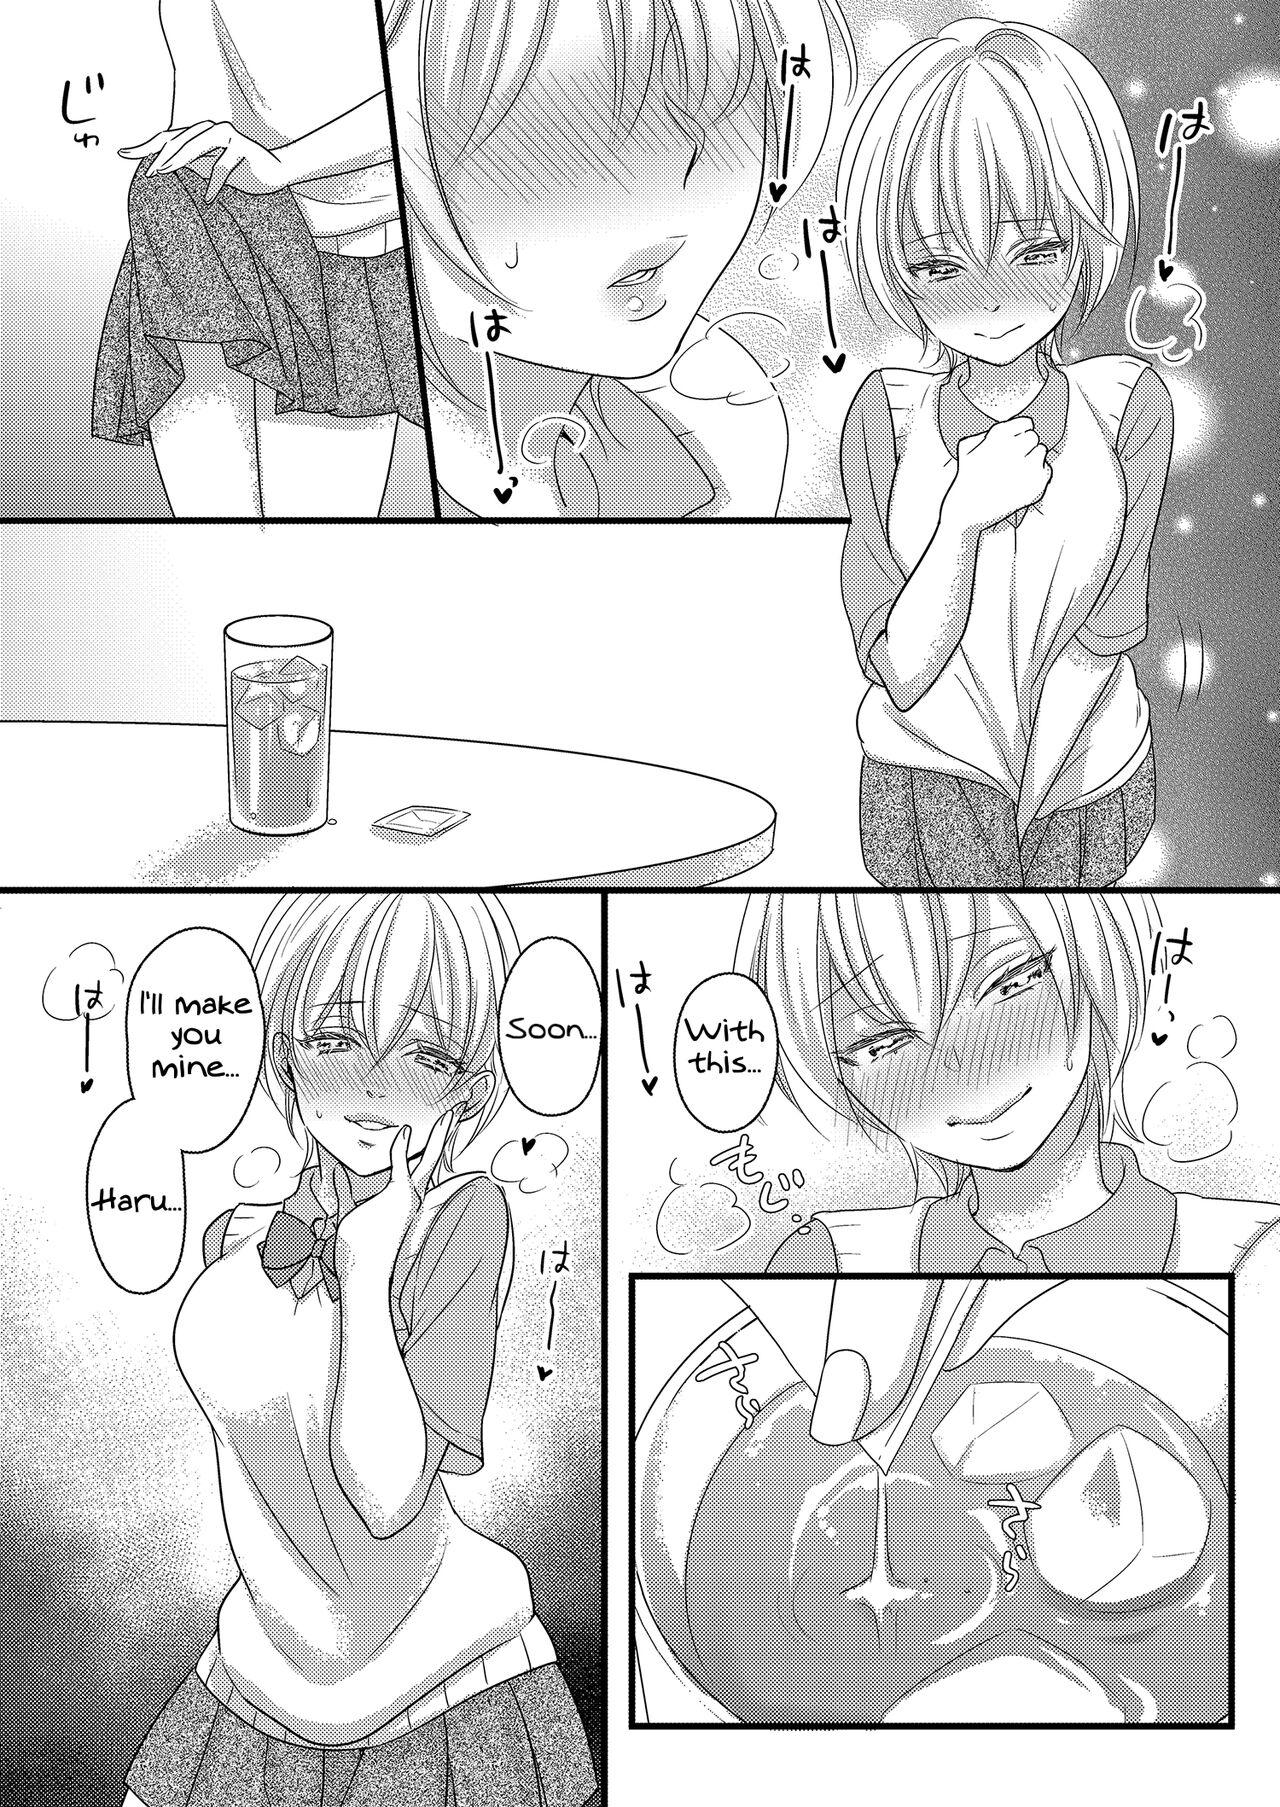 Wet Pussy Haru and Sana ～Love Connected Through Cosplay～ - Original Parody - Page 10